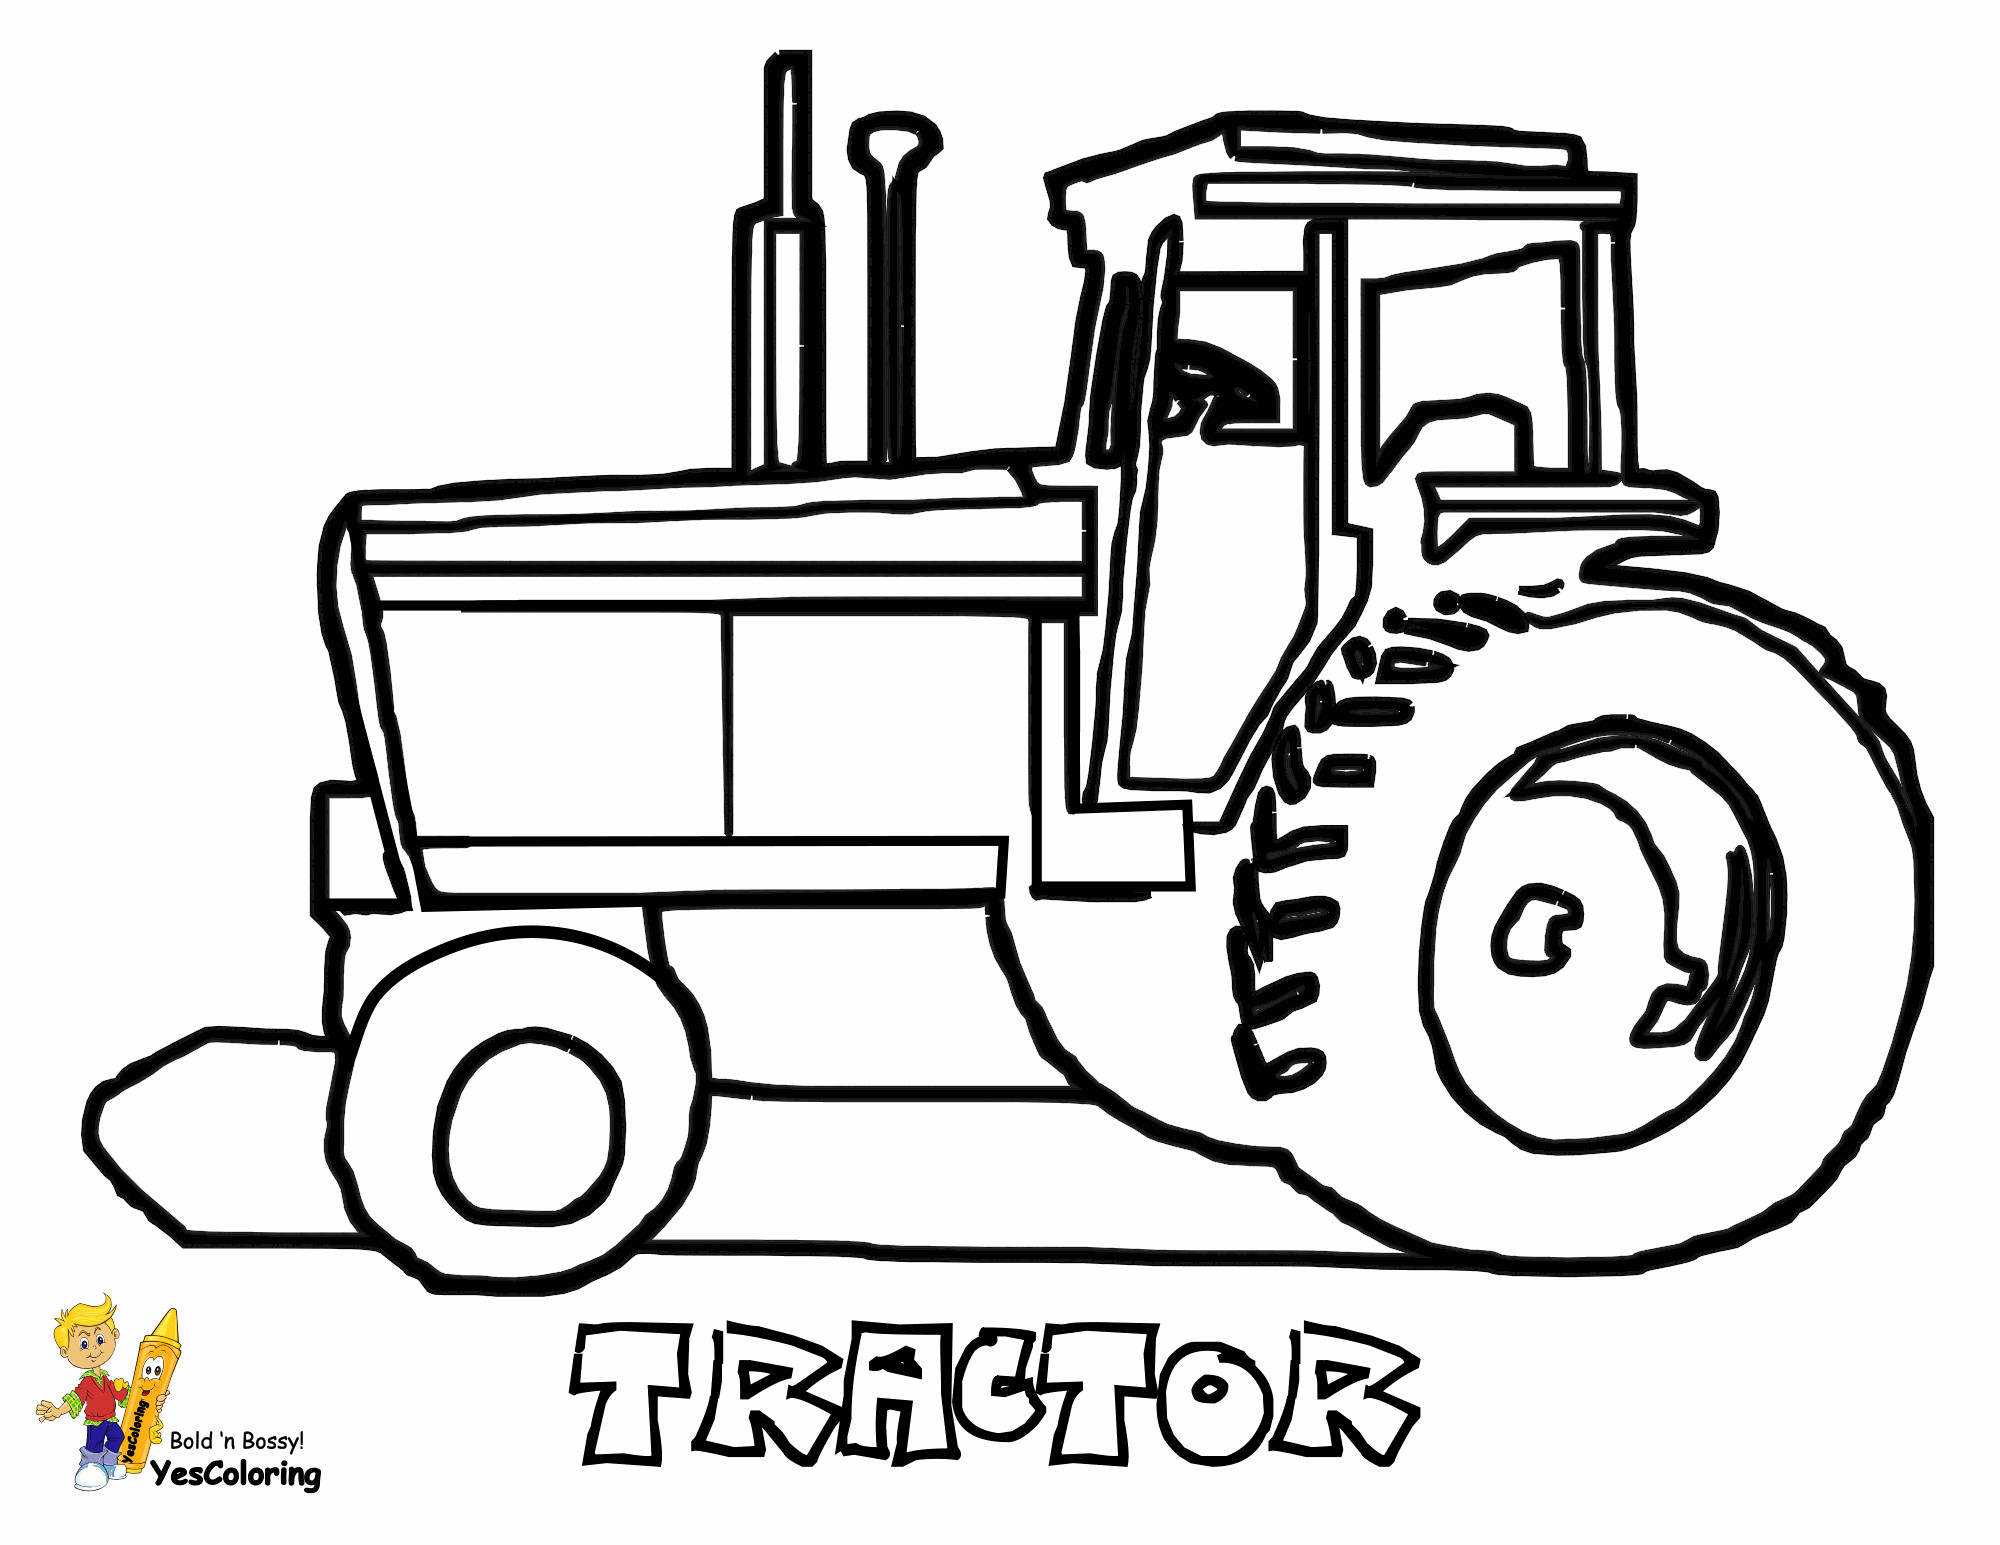 Tractor Coloring Pages For Toddlers
 Tractor coloring page